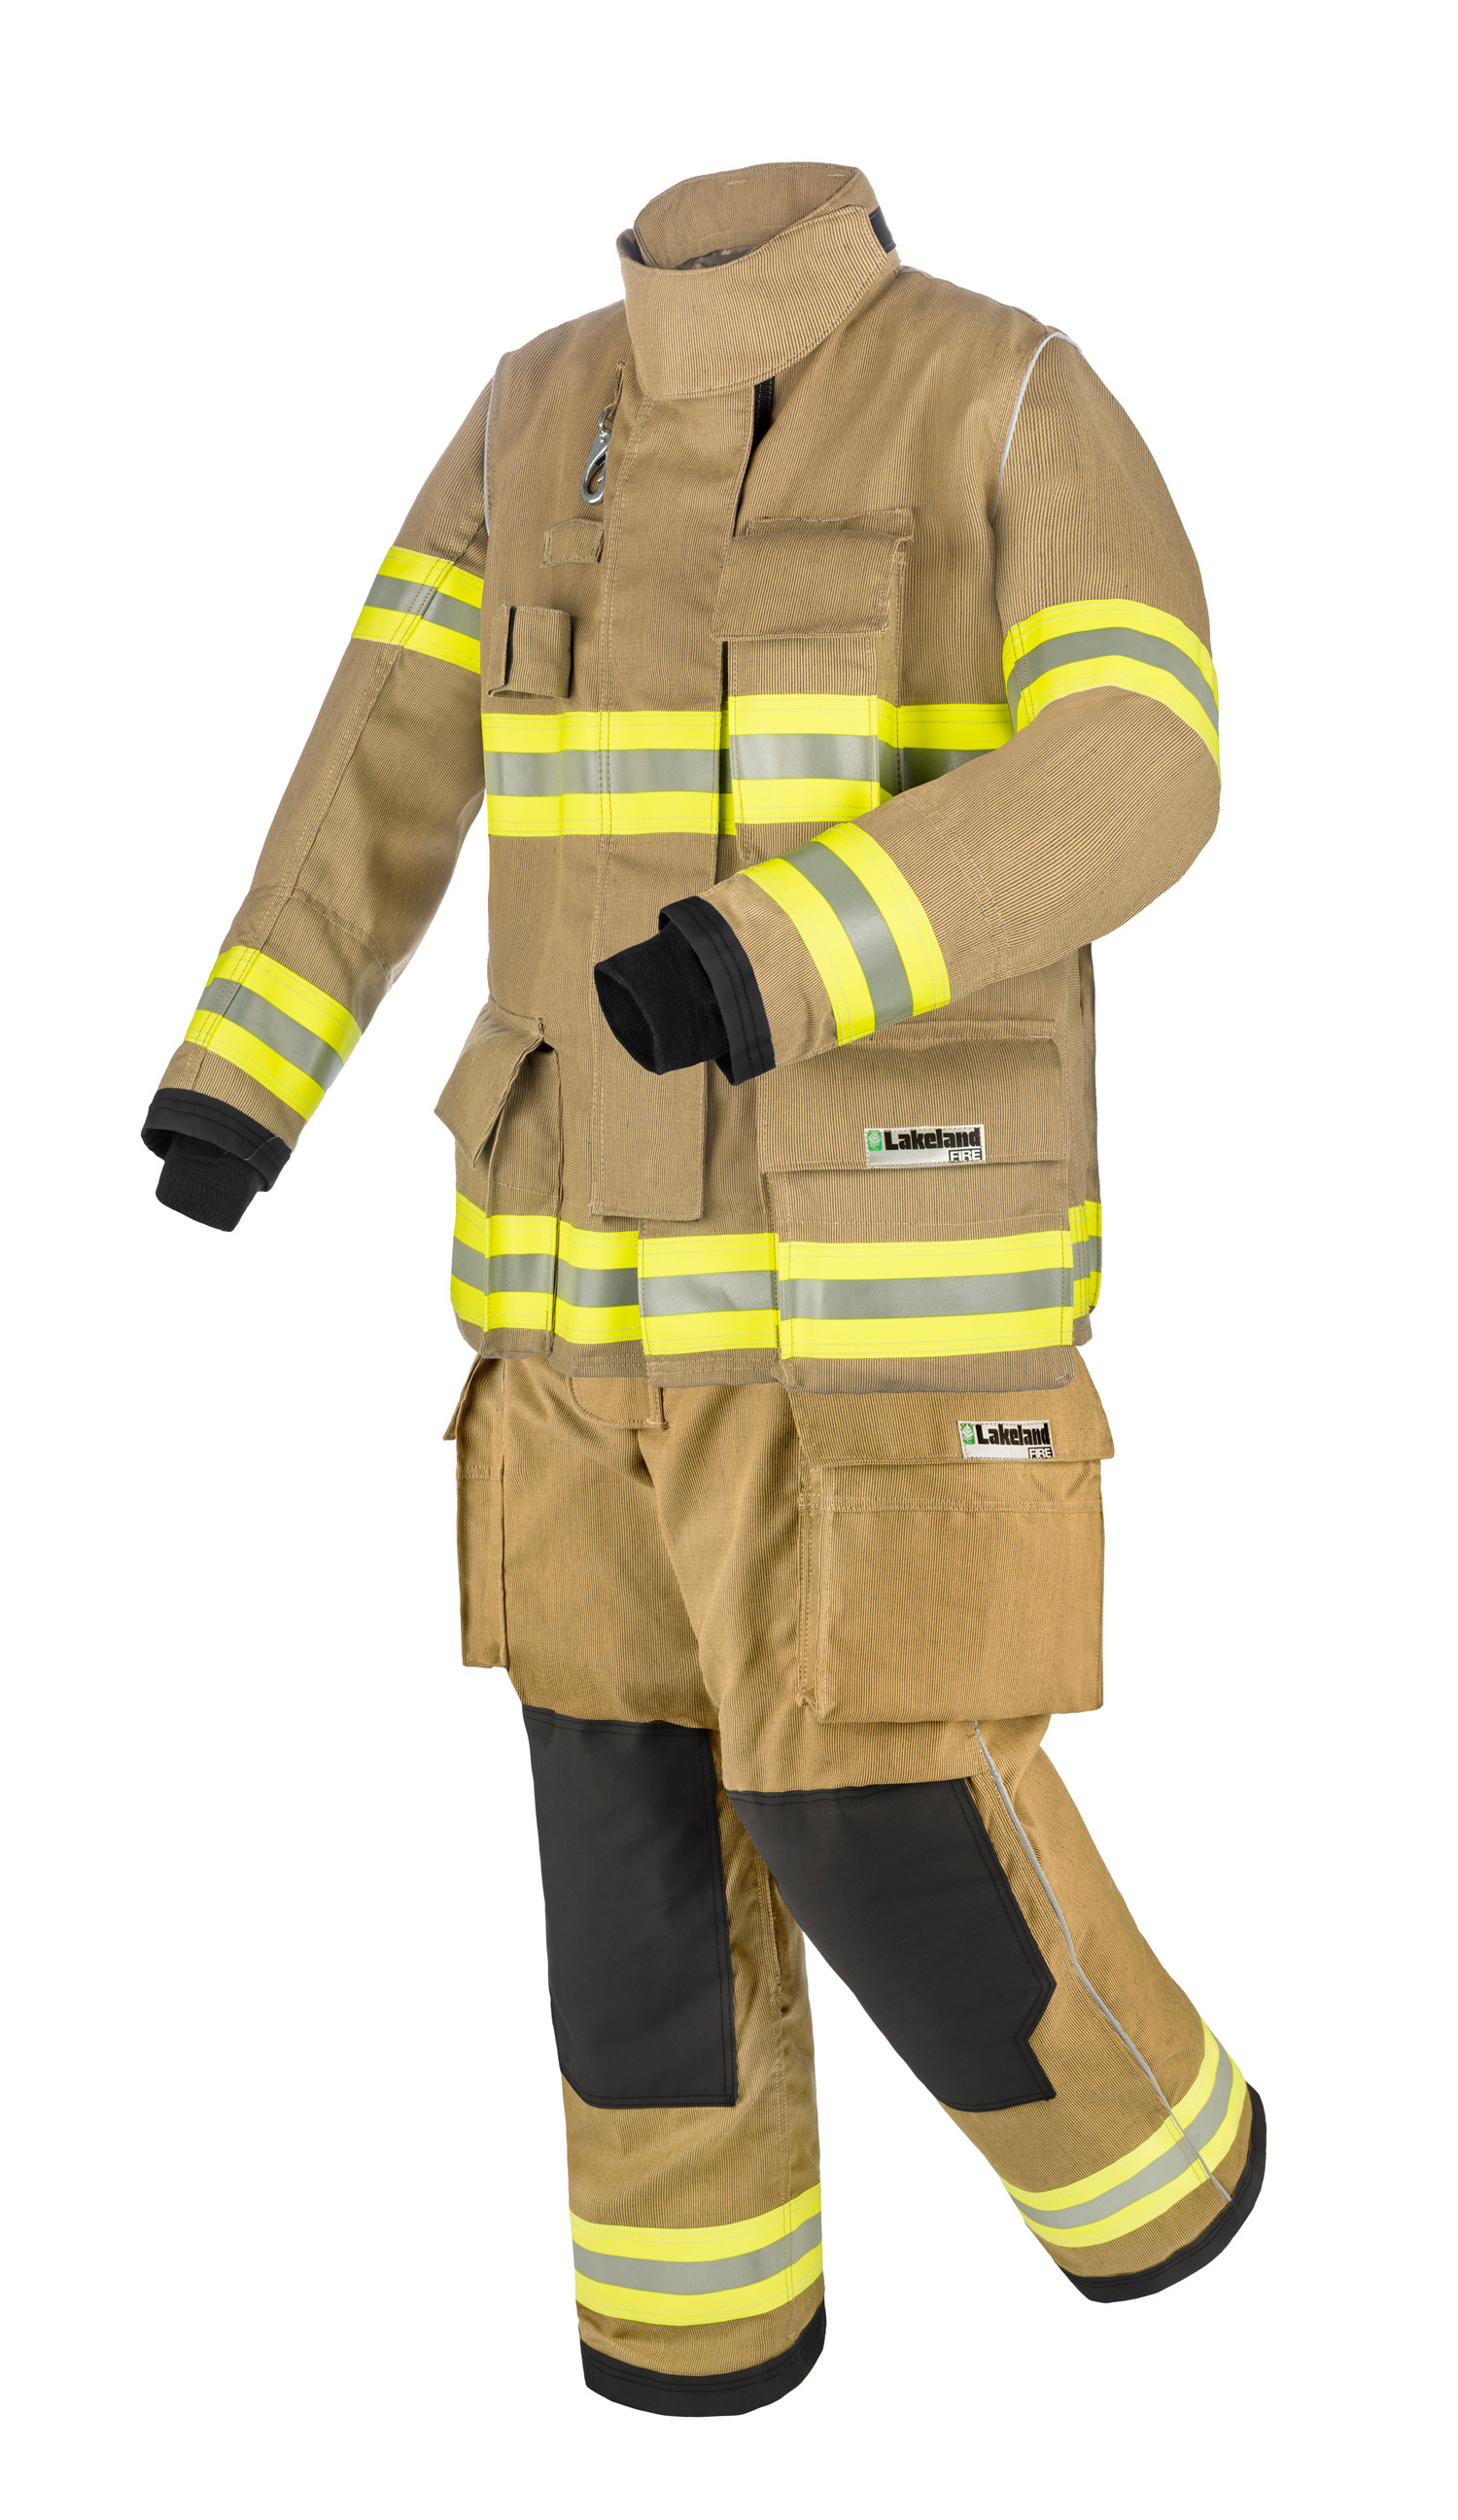 Firefighter Equipment Fire Resistant Trousers And Helmet Emergency Services  Stock Photo  Download Image Now  iStock